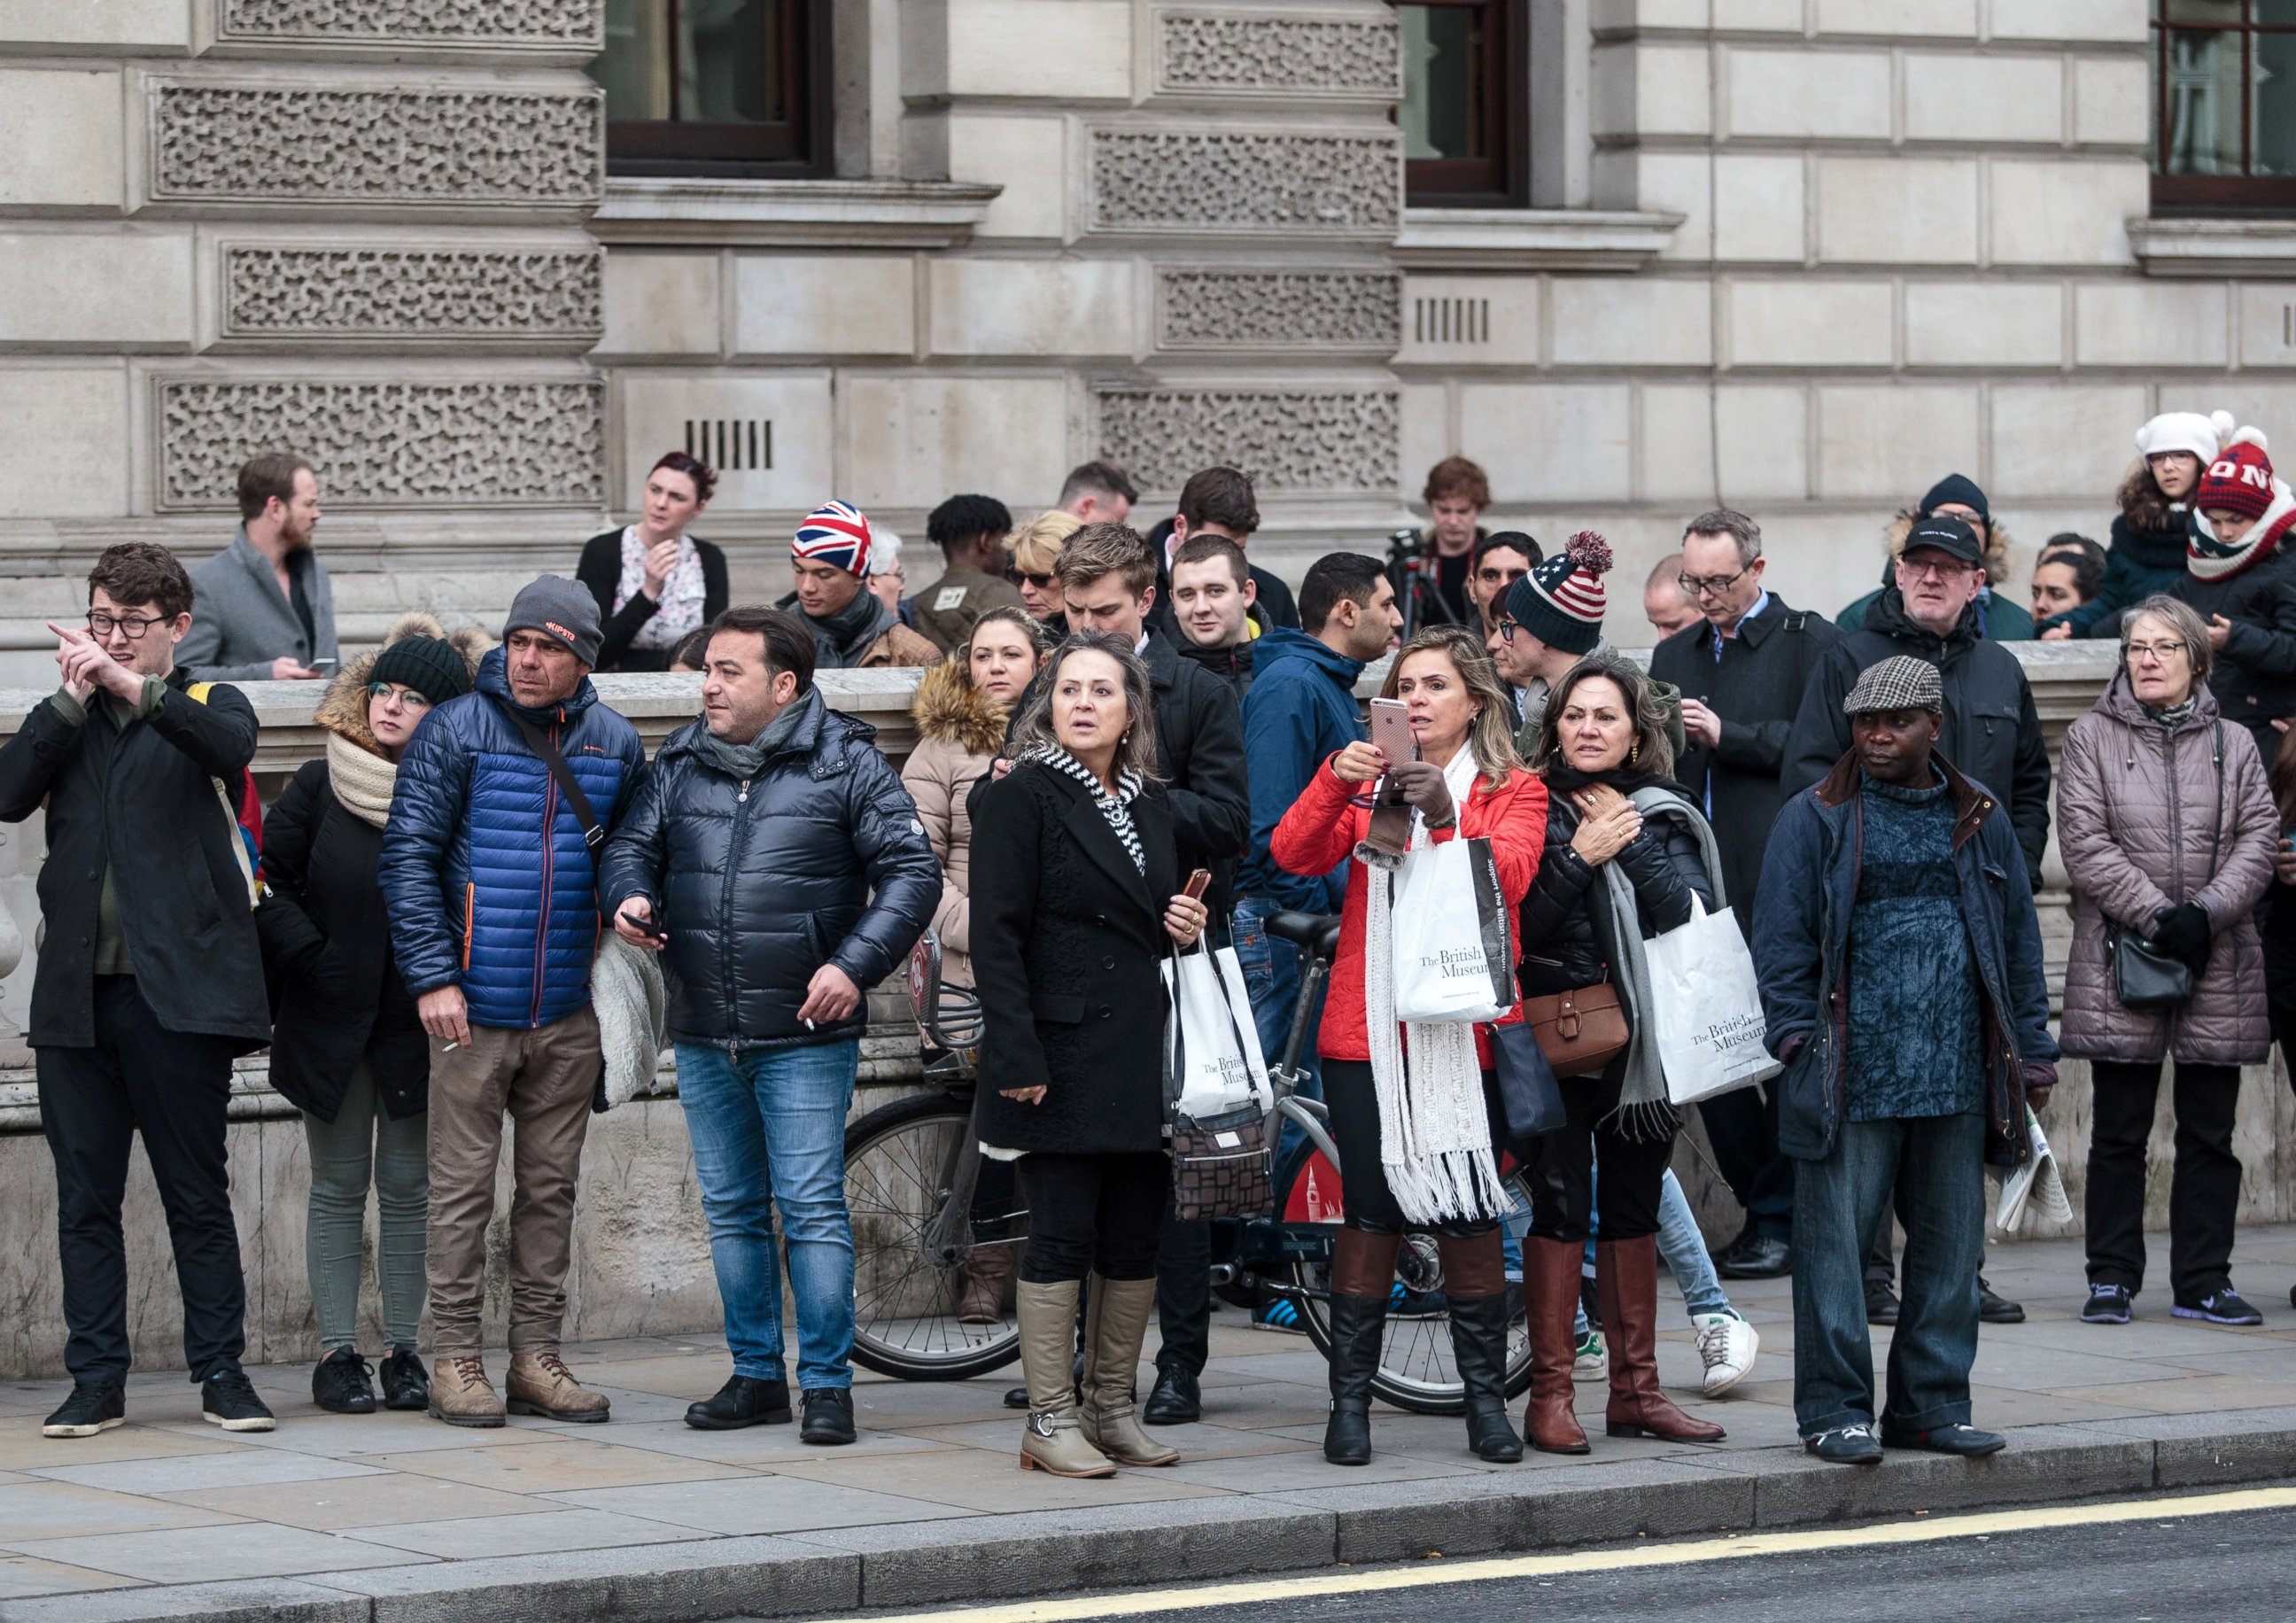 PHOTO: Members of the public look on as roads are closed off by Police around Westminster Bridge and the Houses of Parliament during an incident on March 22, 2017 in London.